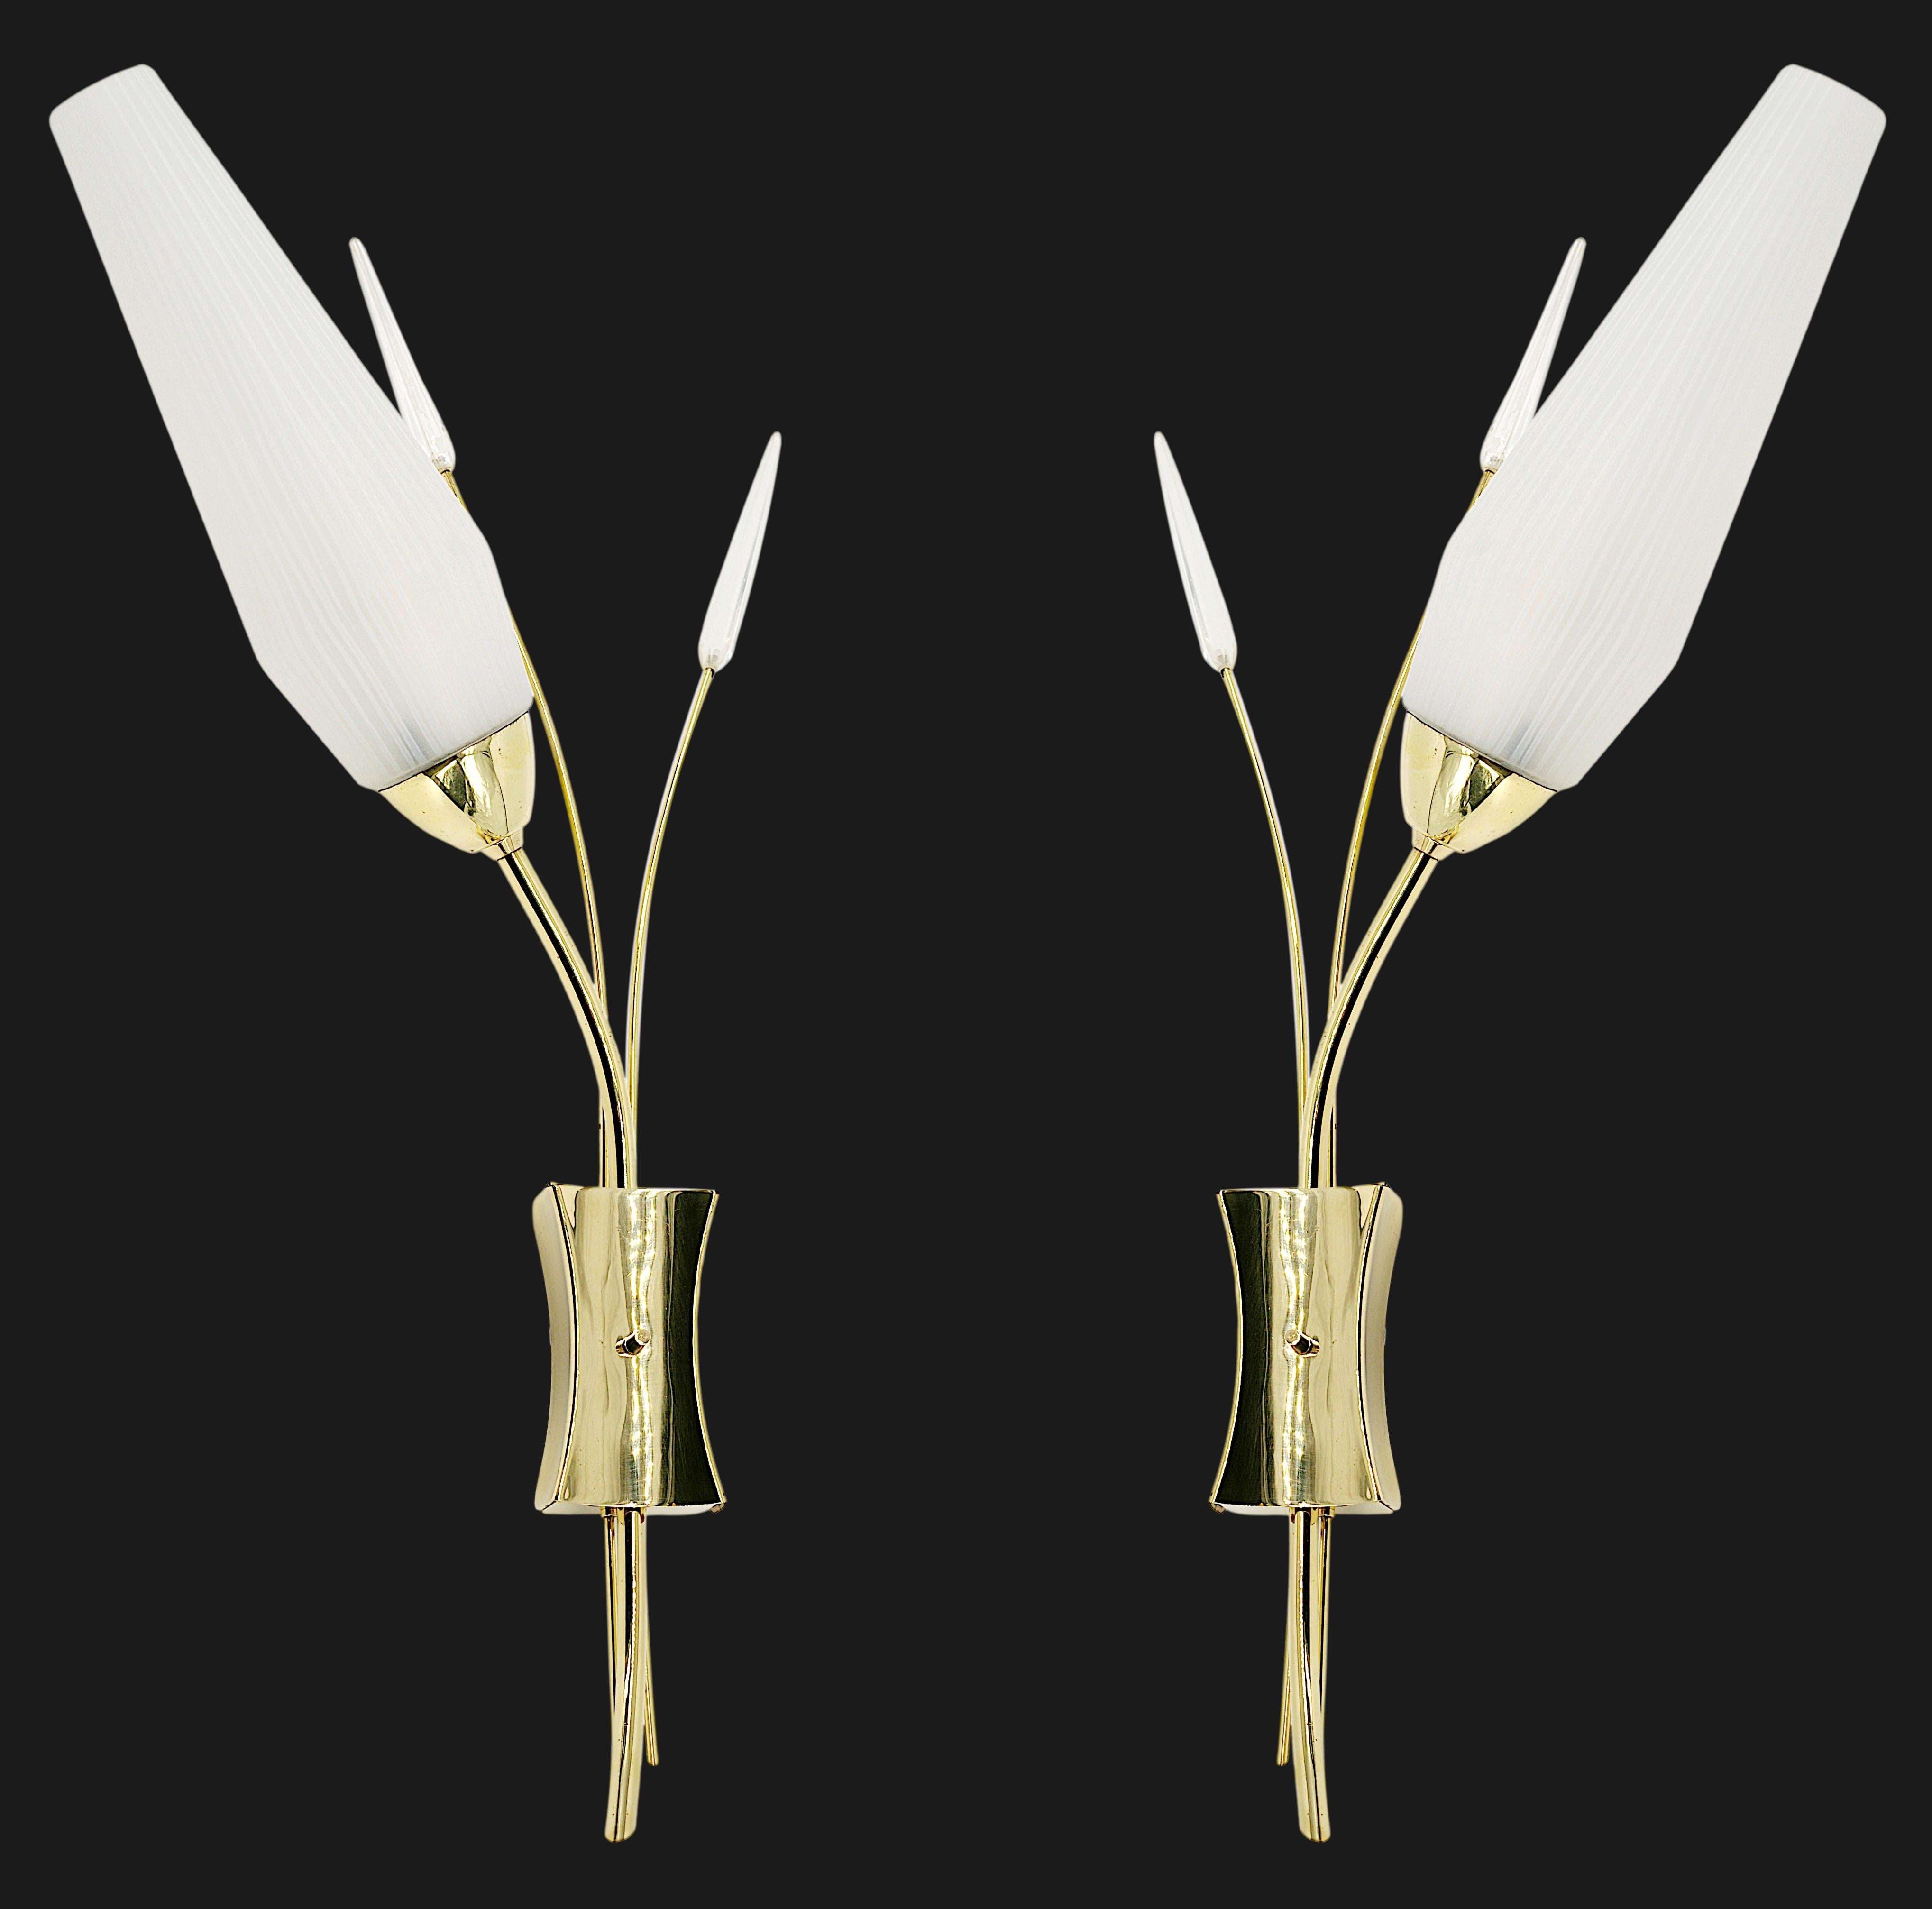 French midcentury pair of wall sconces by Maison Lunel (Paris), France, 1950s. Brass, lucite and glass. Measures: Height: 19.3